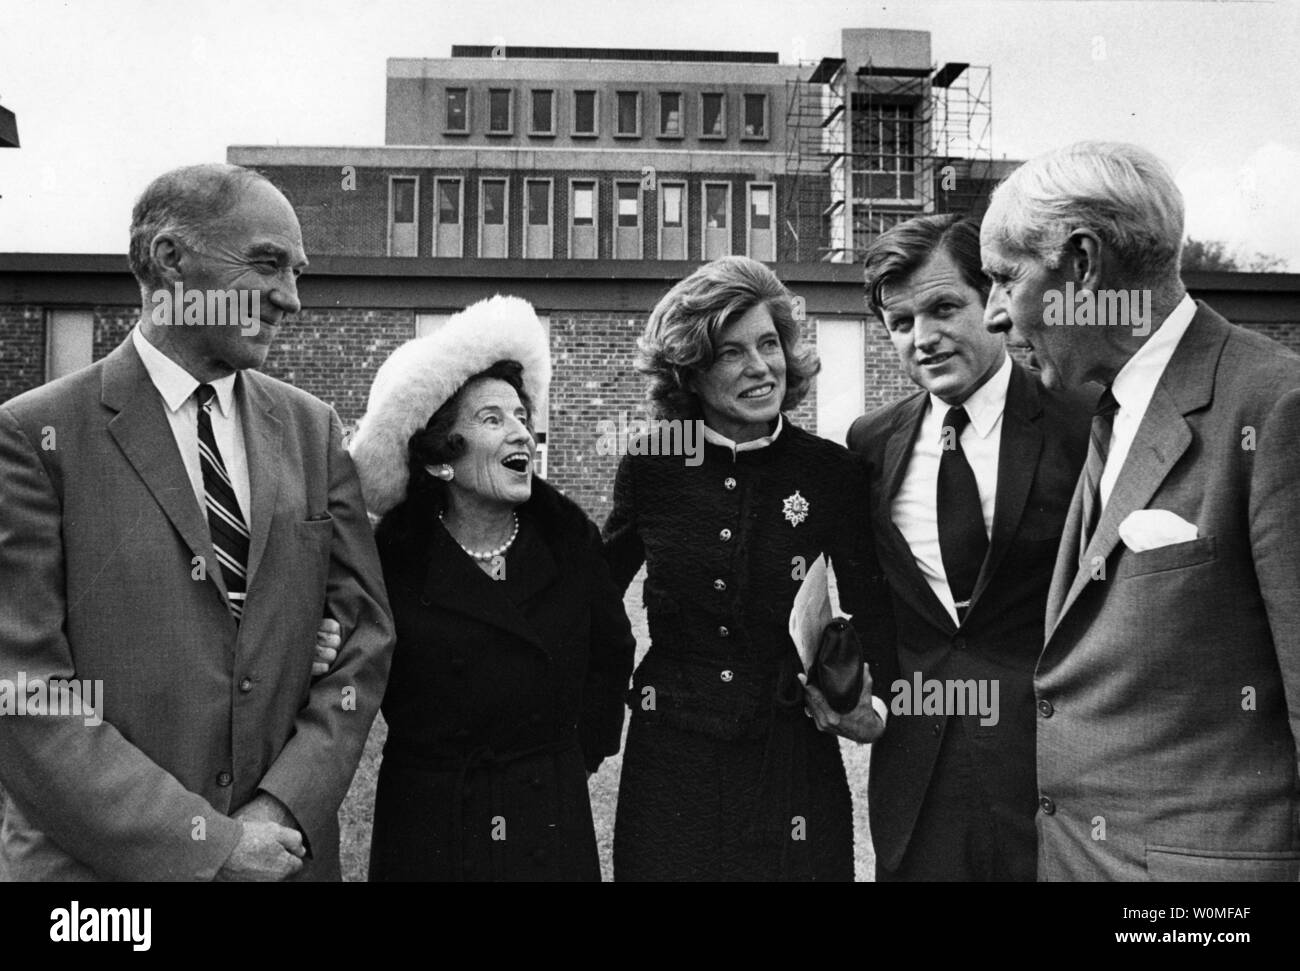 Sen. Edward 'Ted' Kennedy, D-MA, died at his home in Cape Cod, Massachusetts, after a year-long battle against brain cancer on August 25, 2009. Kennedy (2nd from right) is shown in Waltham, Mass., on October 14, 1970 for the dedication of the Eunice Kennedy Shriver Institute. L-R: Dr. Raymond D. Adams director of the Center; Mrs. Rose Kennedy; Mrs. Eunice Kennedy Shriver; Sen. Kennedy; and Mr. David Crockett, Associate Director of Massachusetts Hospital.   UPI/Files. Stock Photo